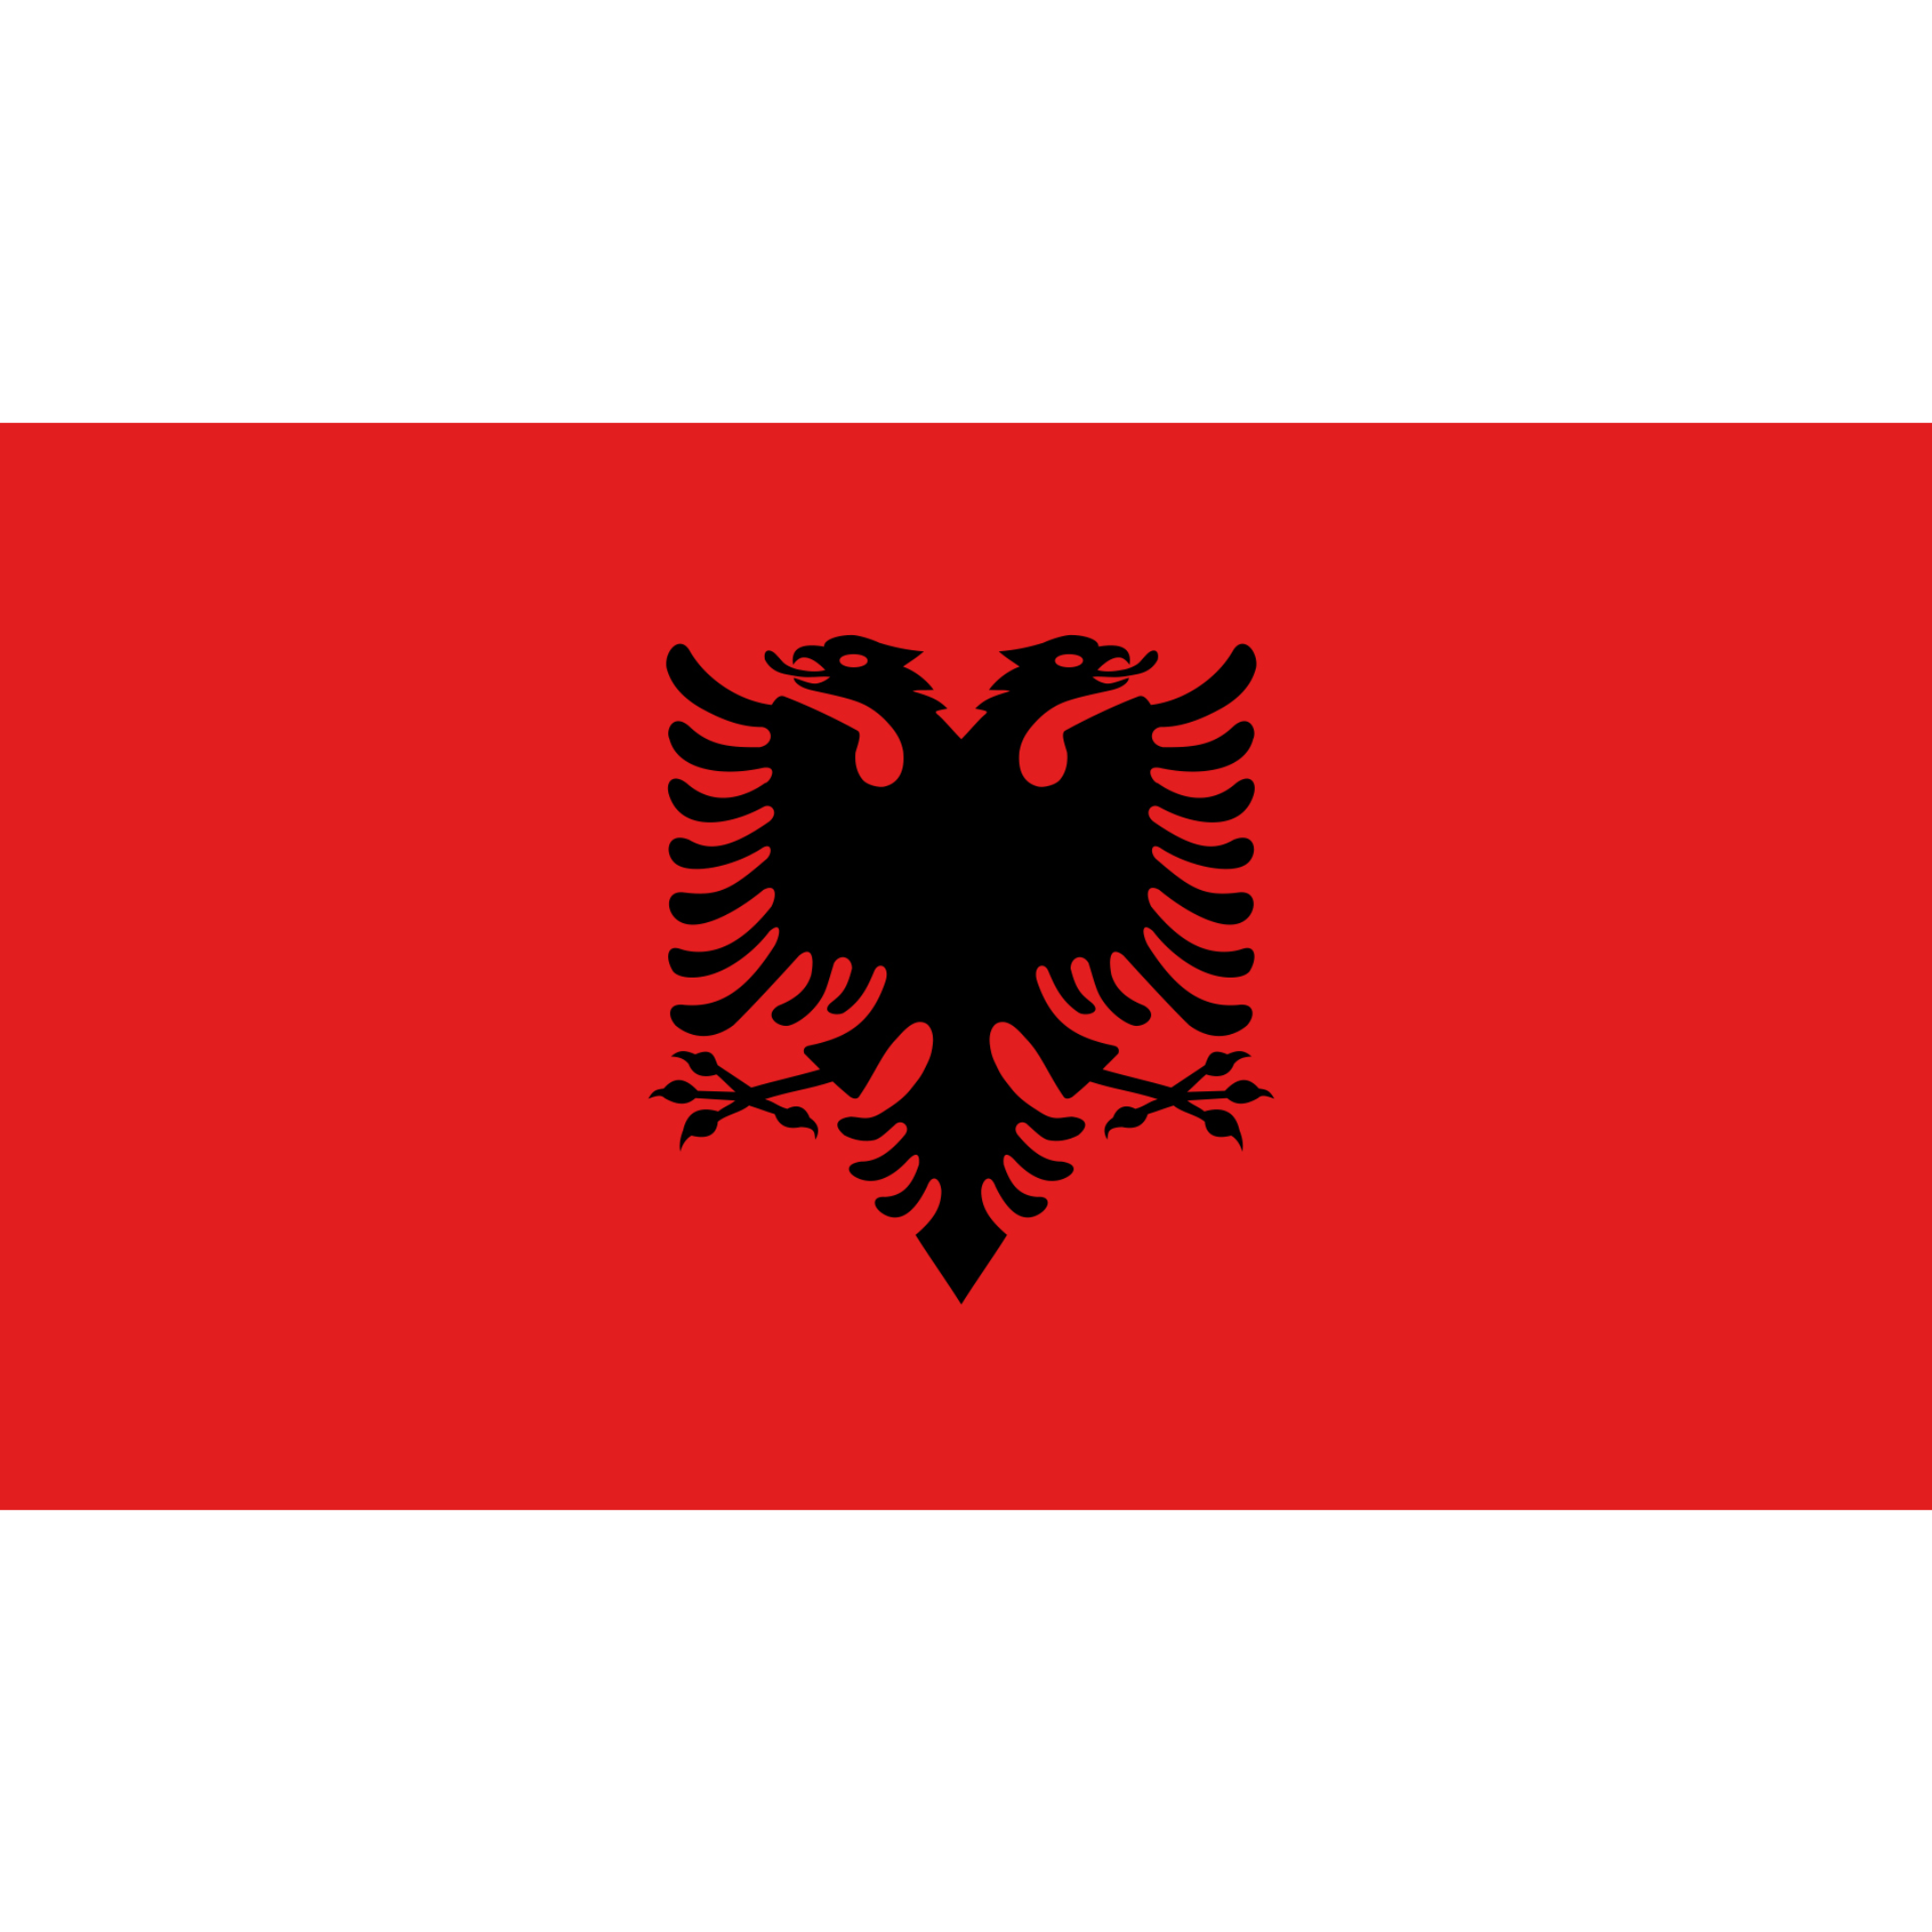 The flag of Albania has a red rectangular background and a black double-headed eagle in the centre.